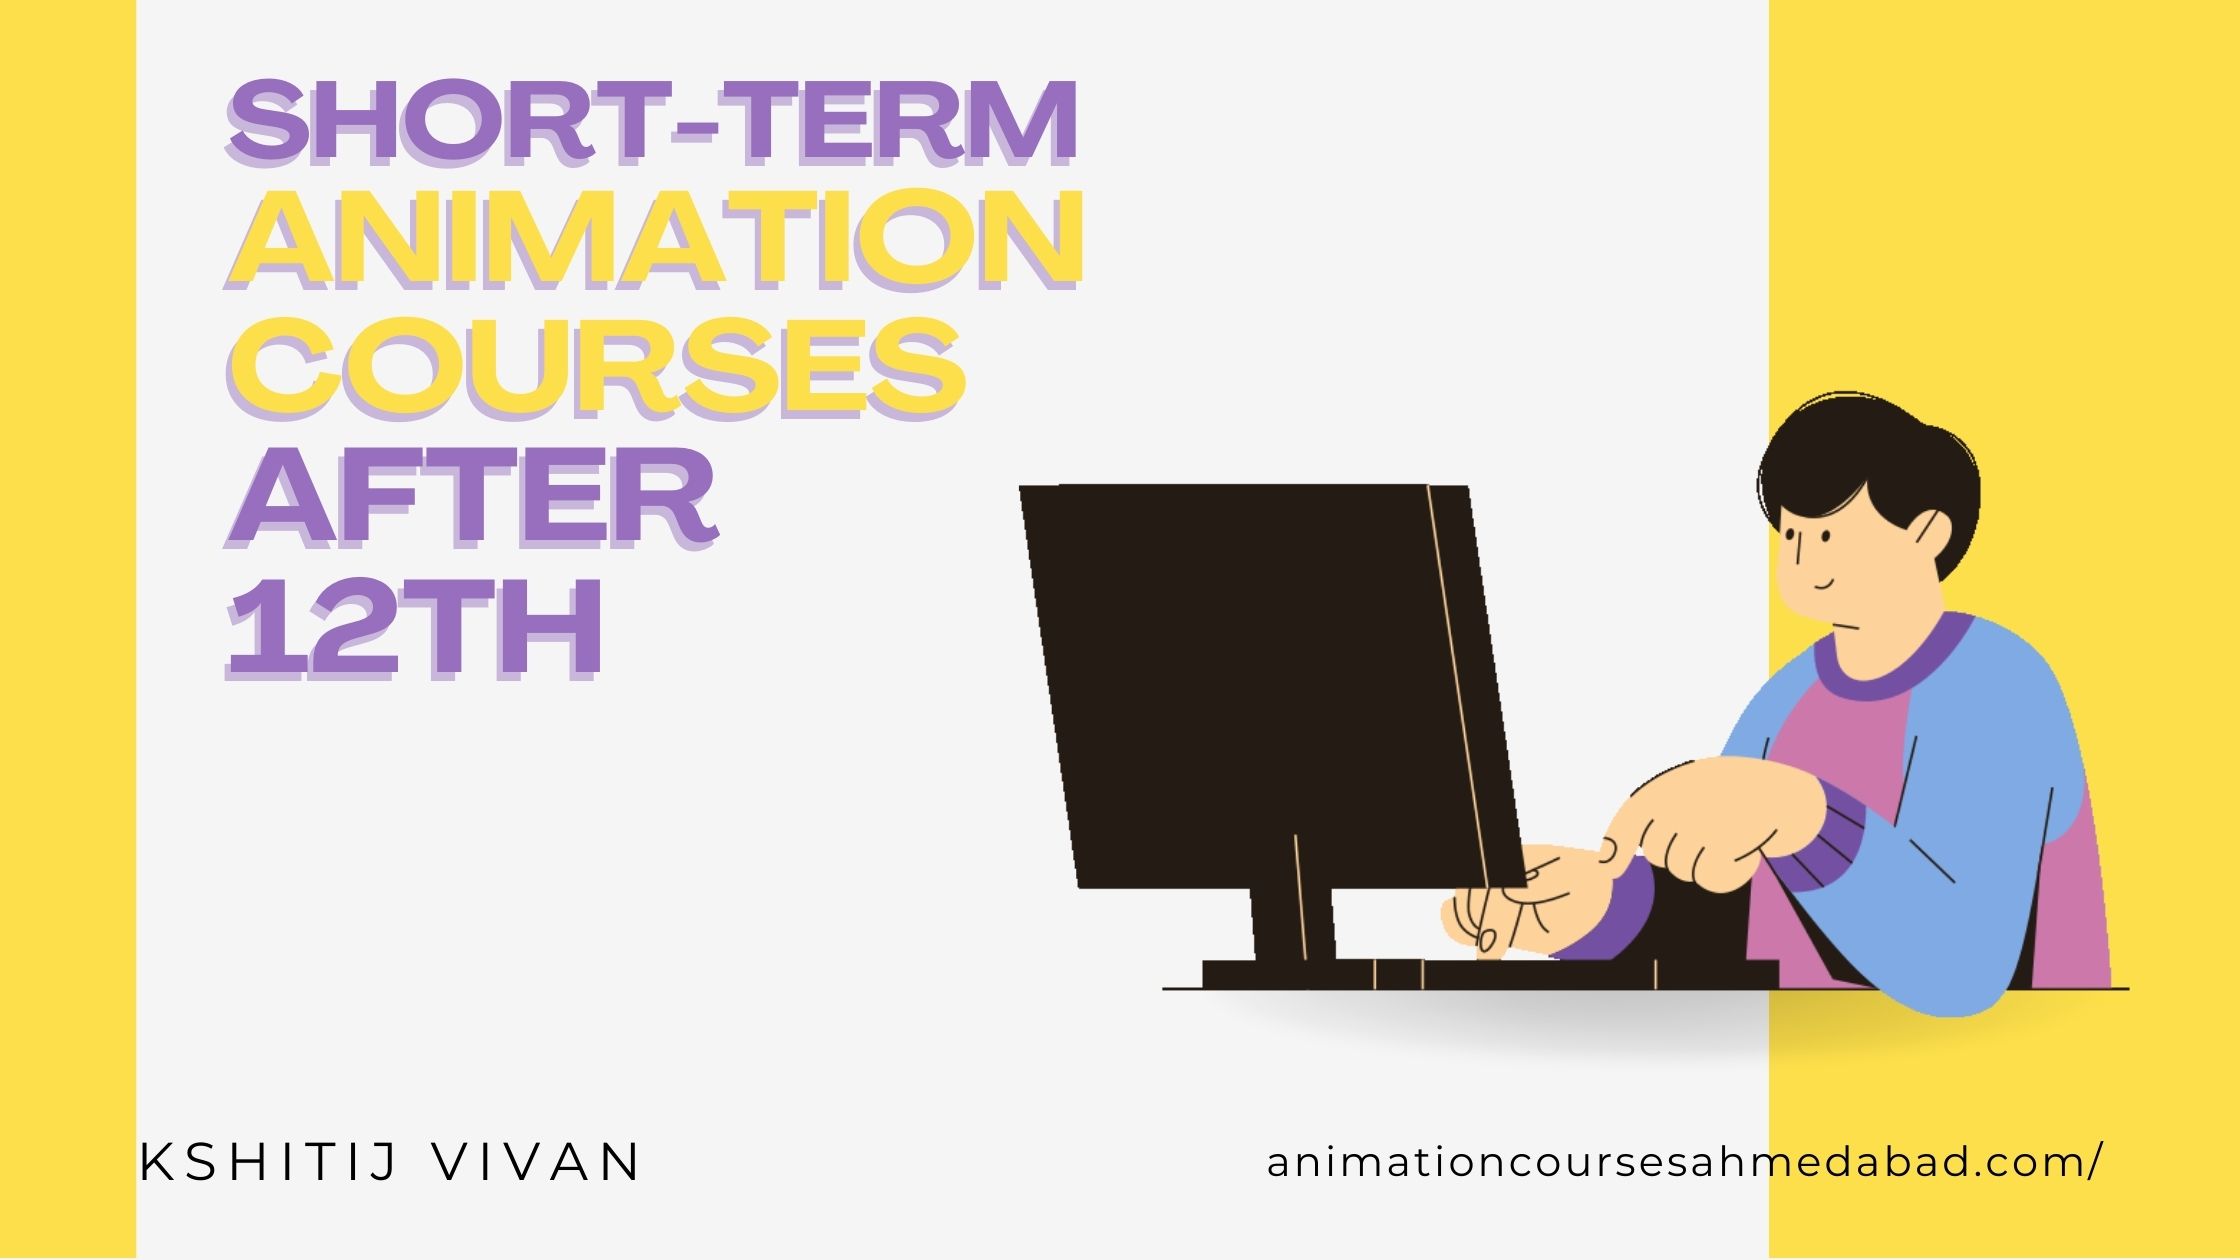 Short term animation courses after 12th